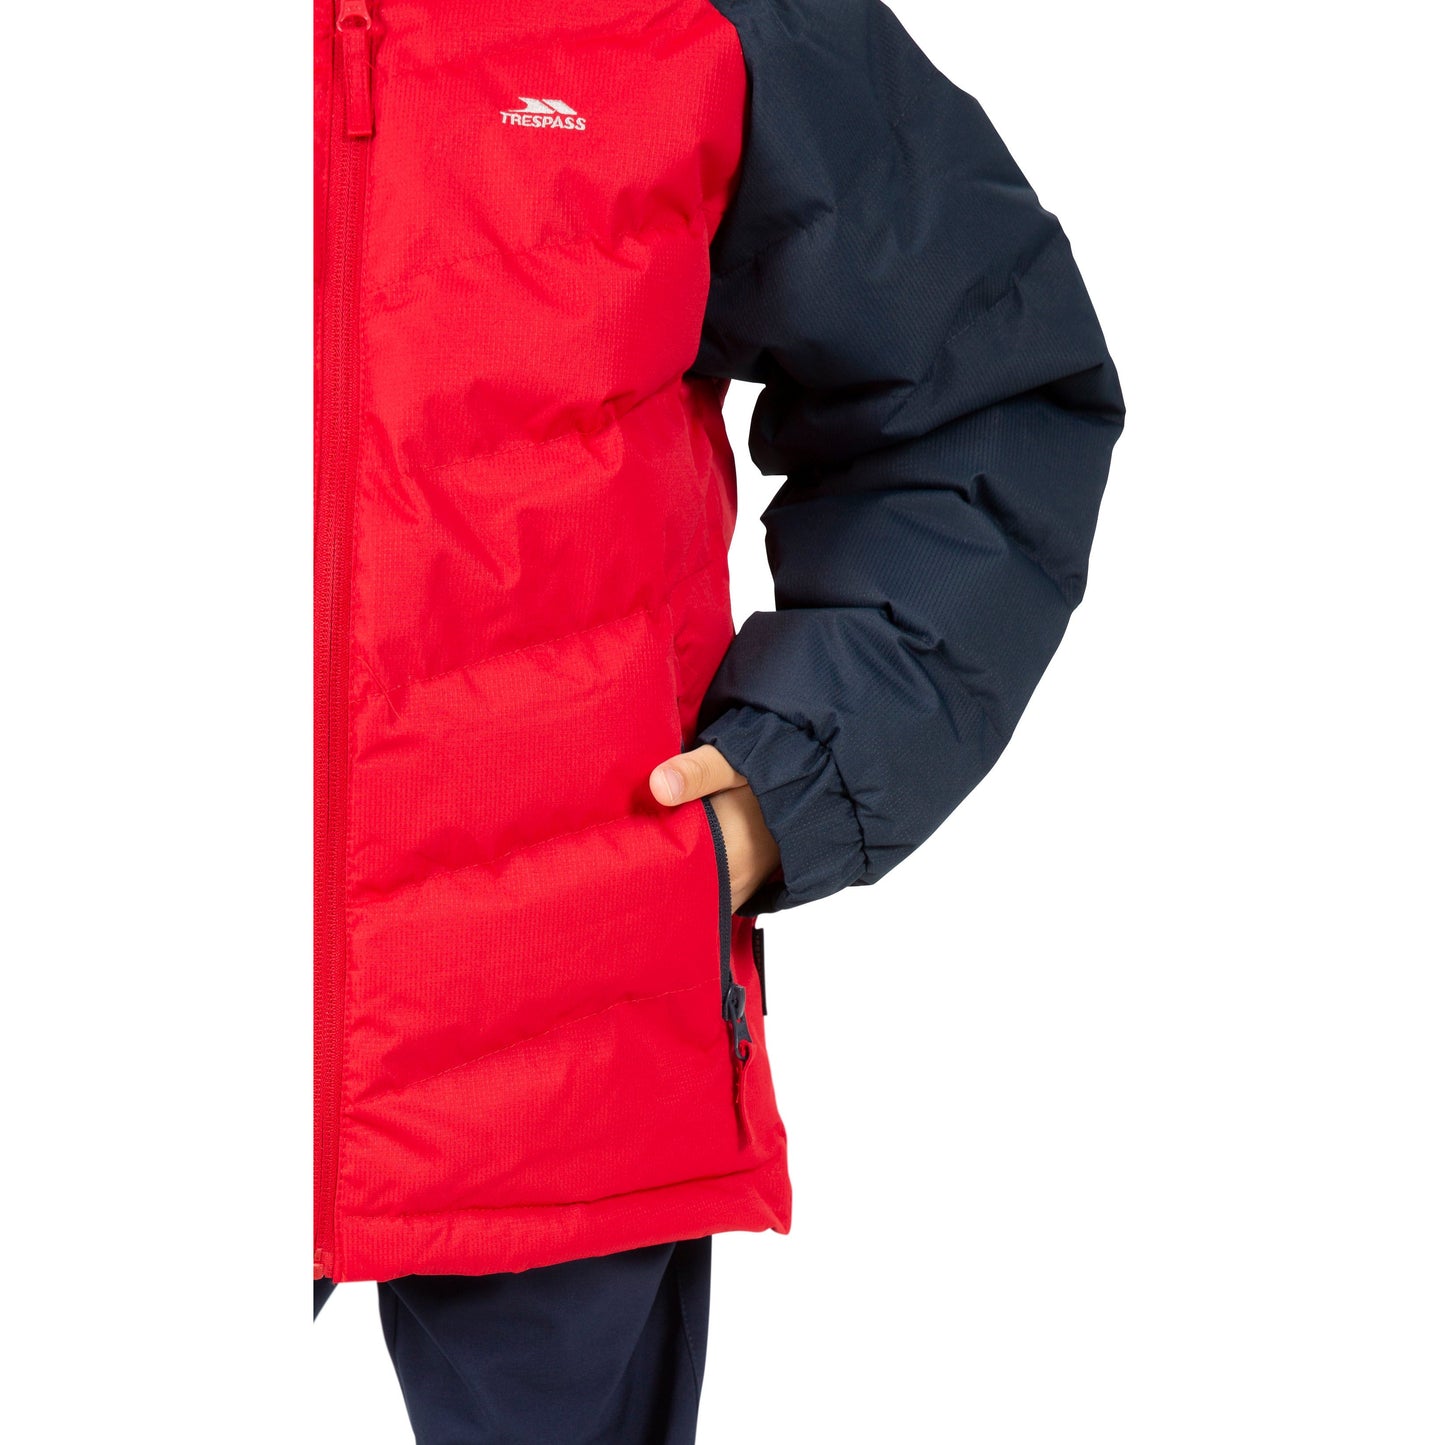 Sidespin Boys' Waterproof Insulated Padded Jacket in Red